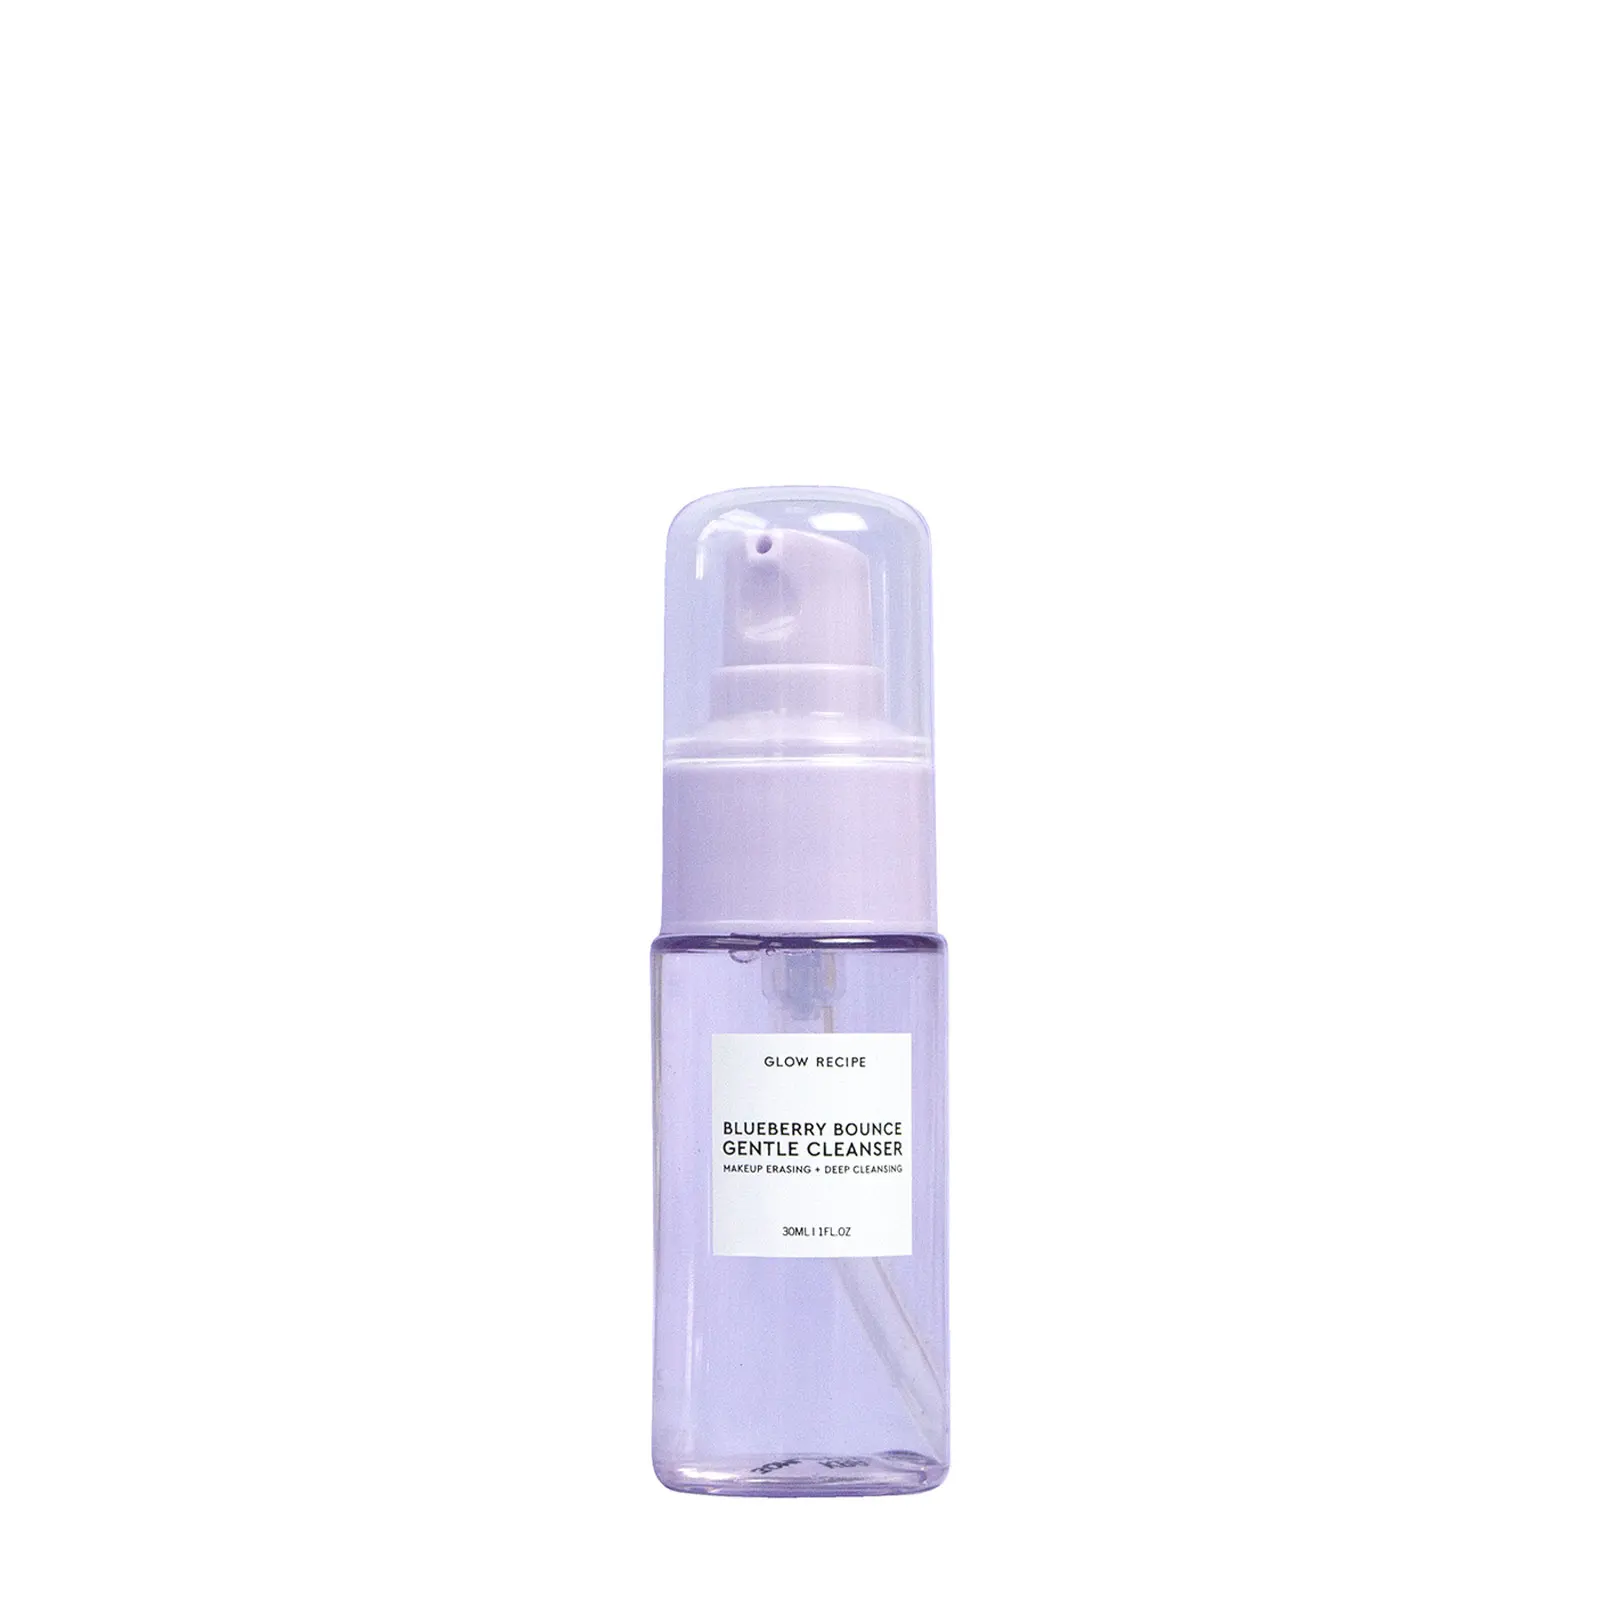 Glow Recipe Blueberry Bounce Gentle Cleanser 30ml Discounts and Cashback